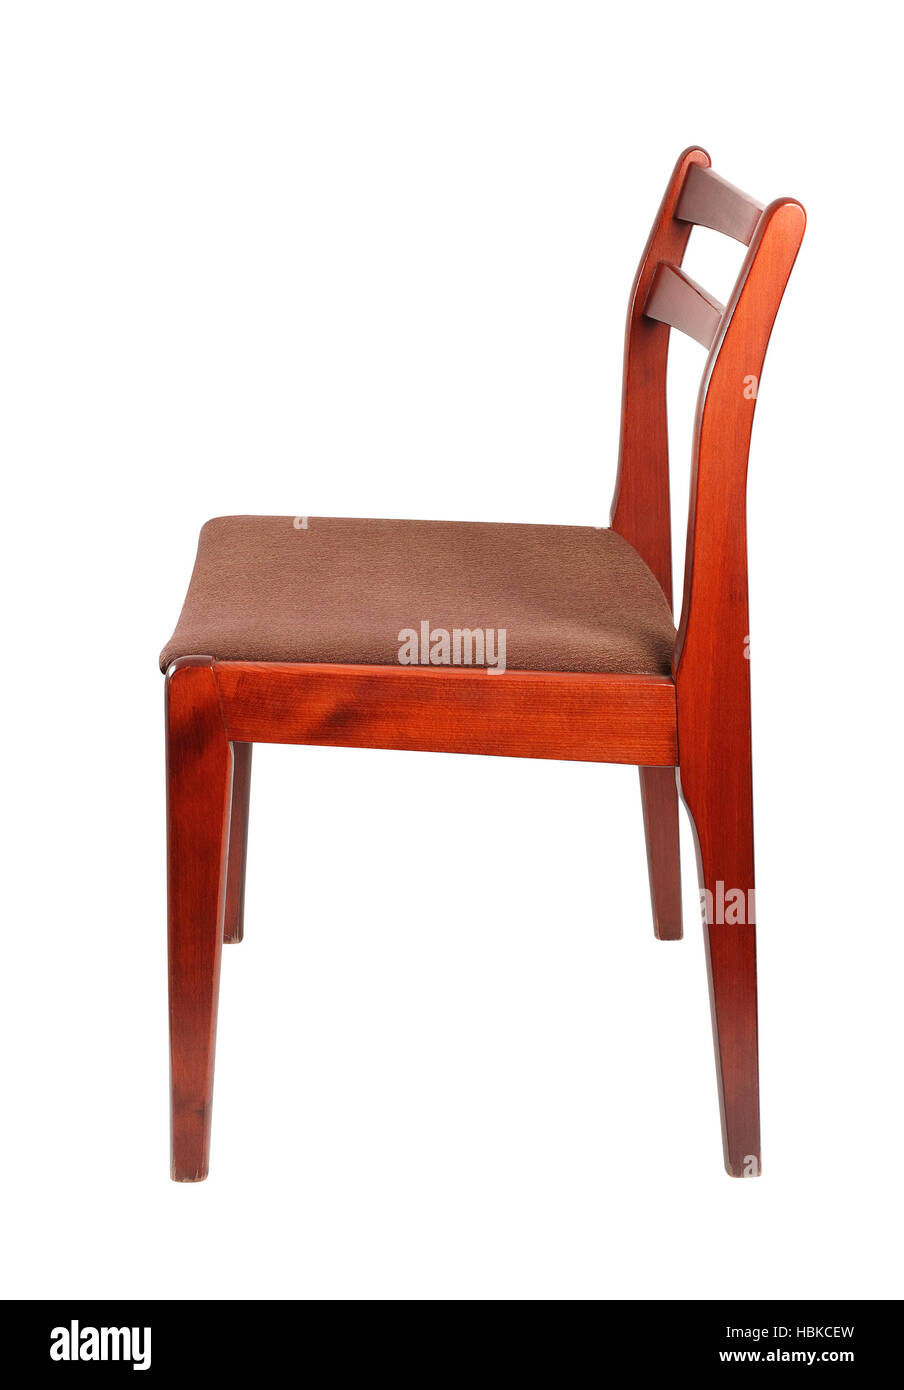 Fabric upholstered retro wooden chair. Isolated with clipping path. Stock Photo